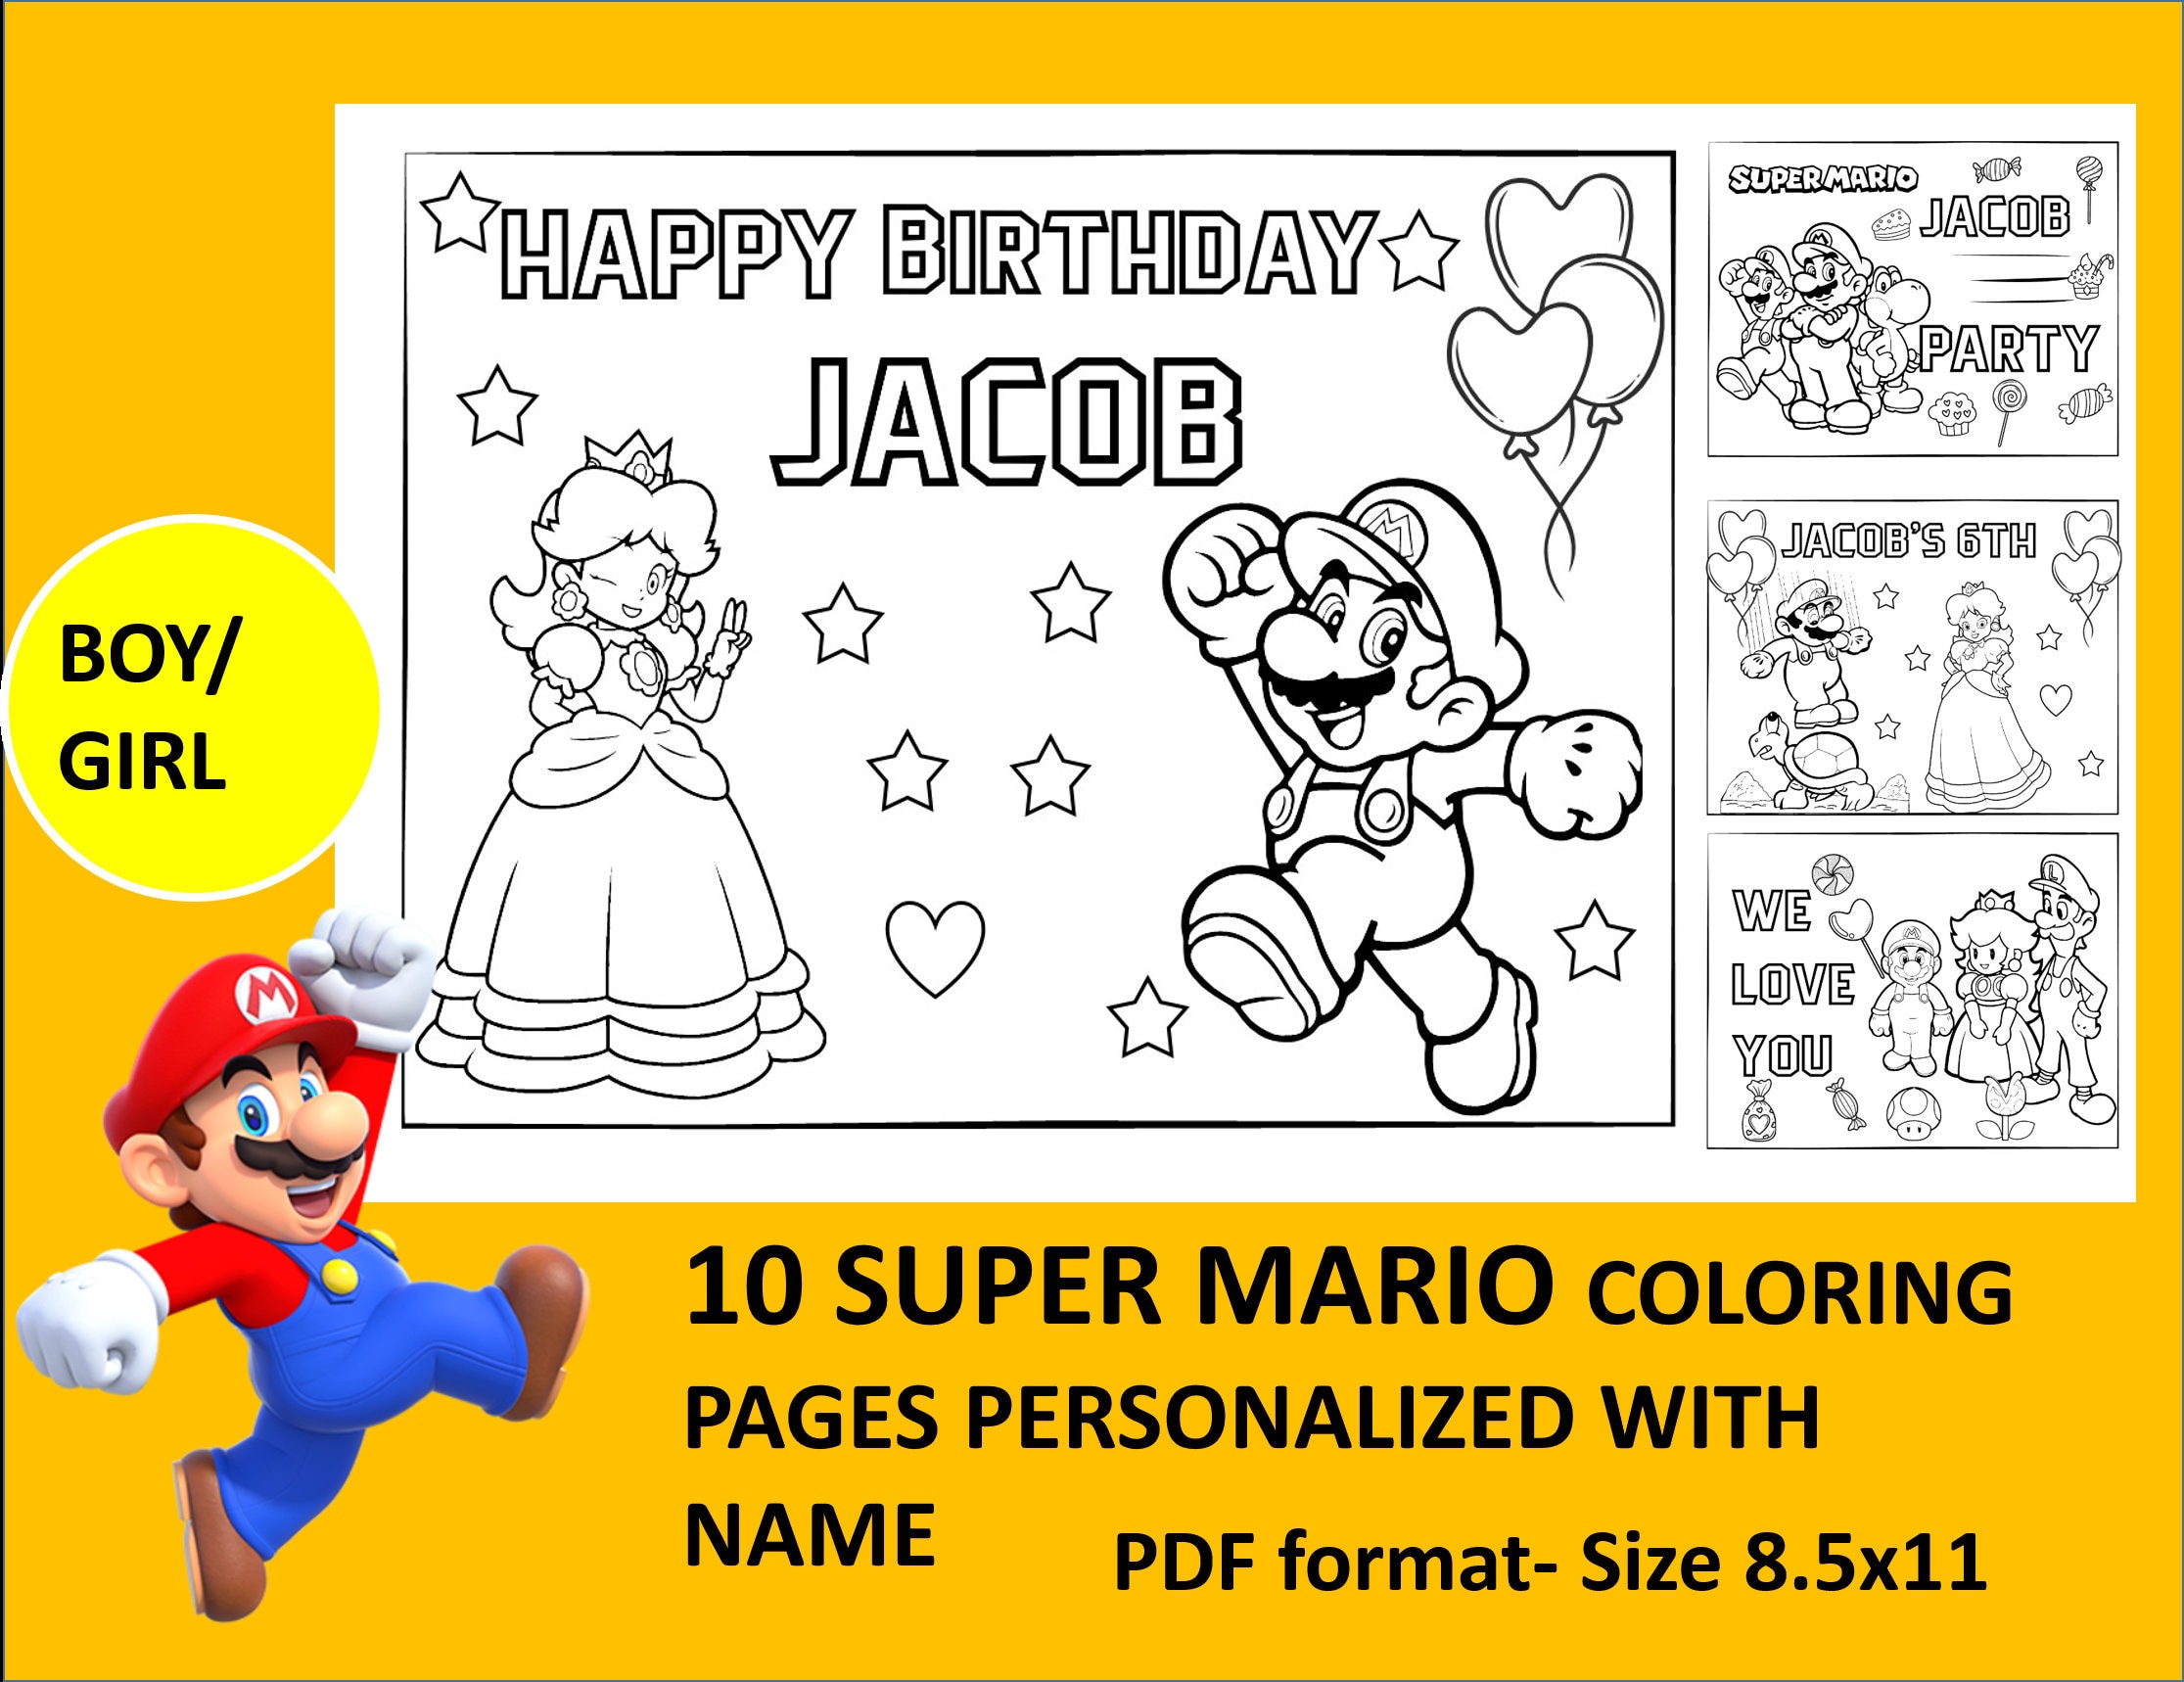 Printable super mario coloring page for birthday personalized with name active